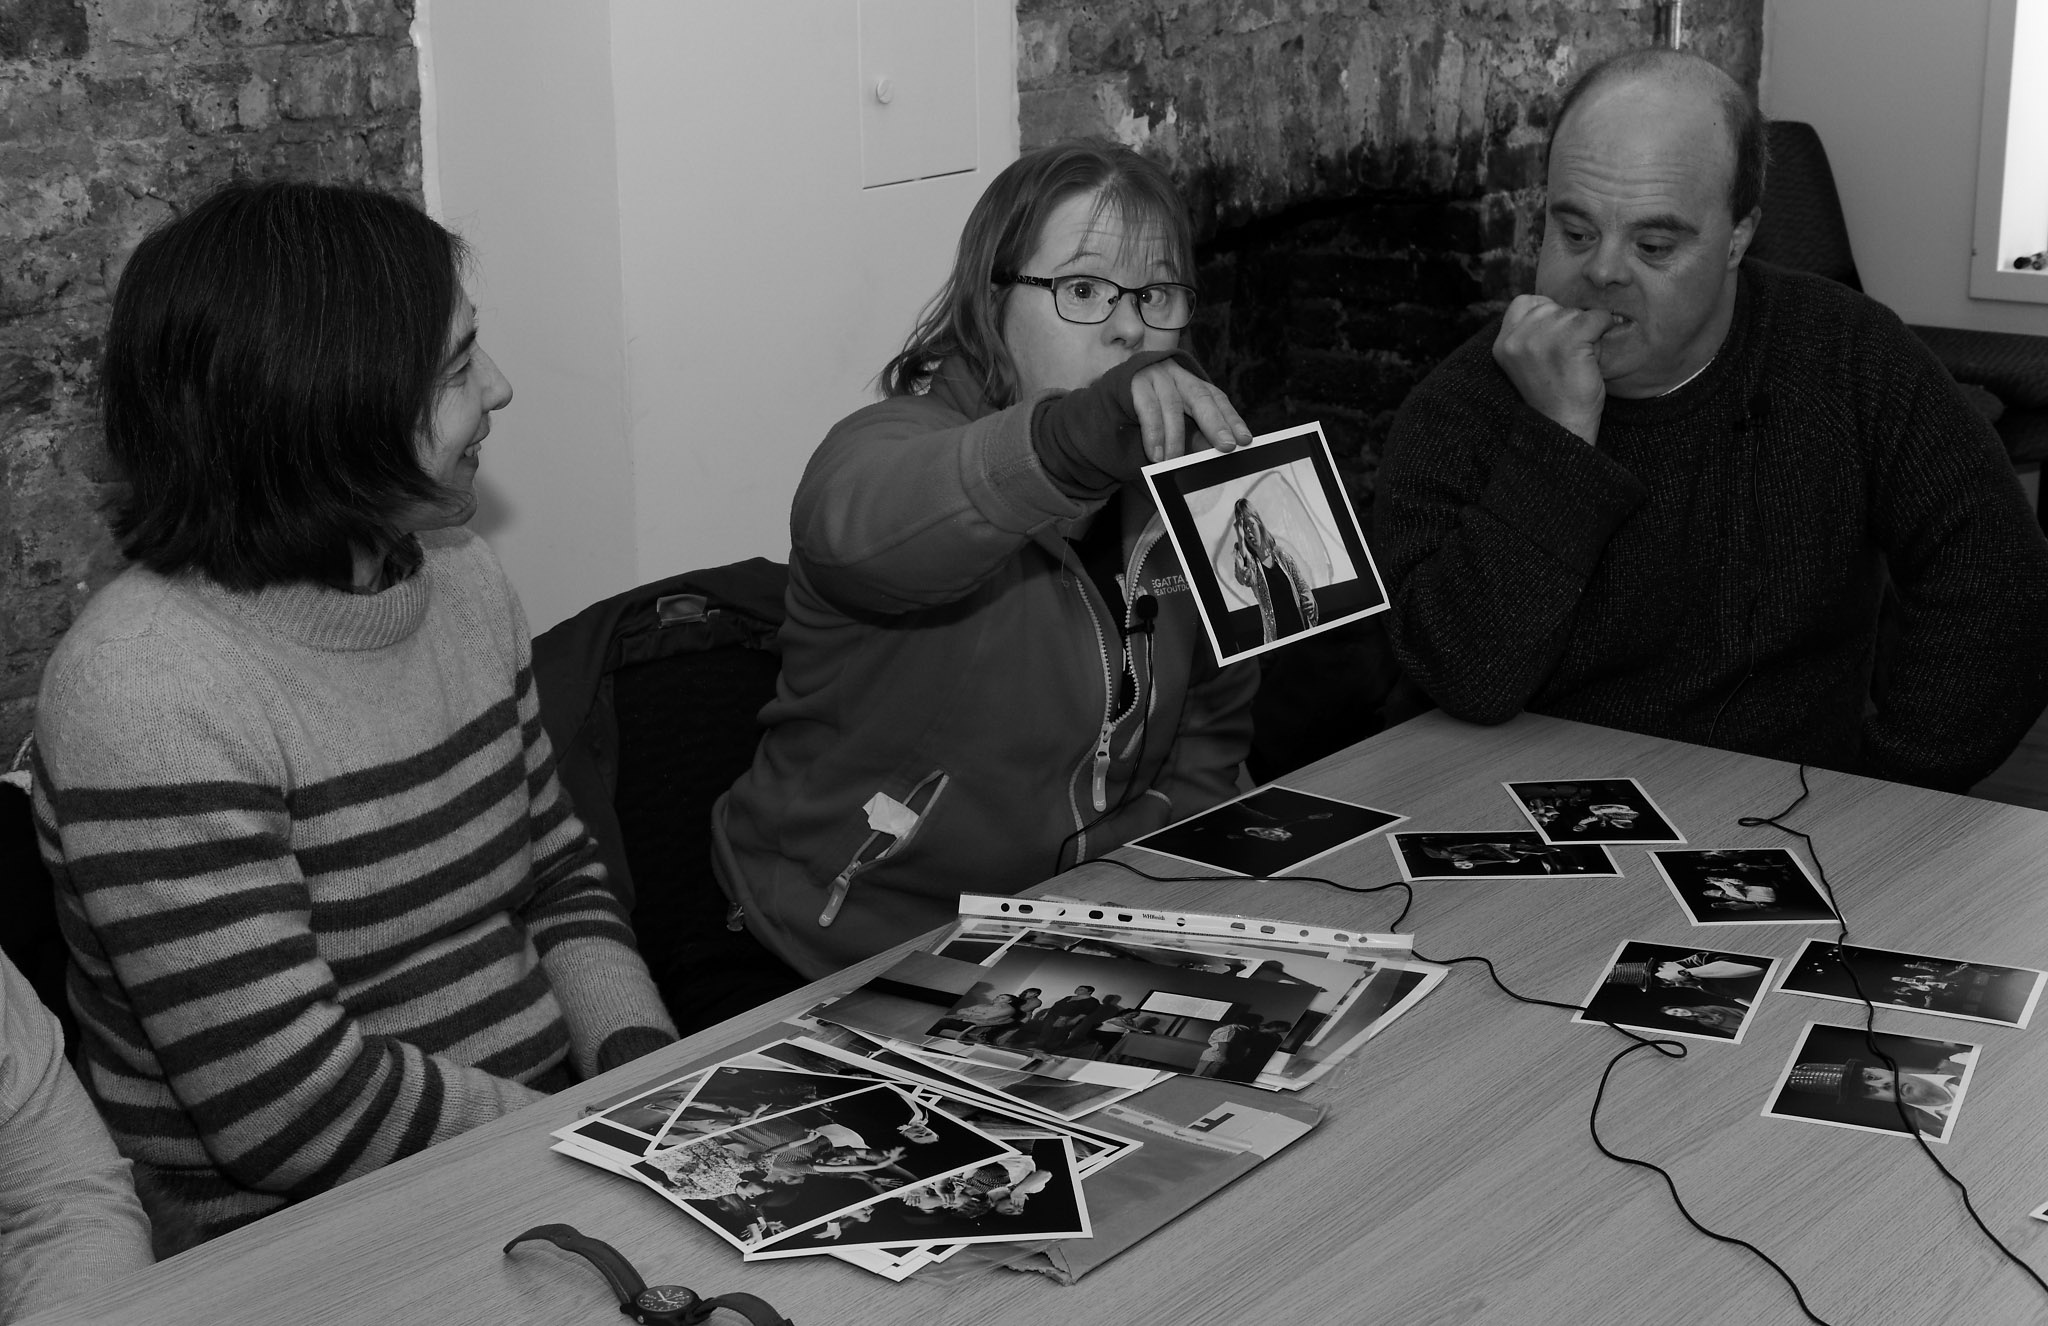 Bethan holding a photograph of herself at an interview with other people smiling